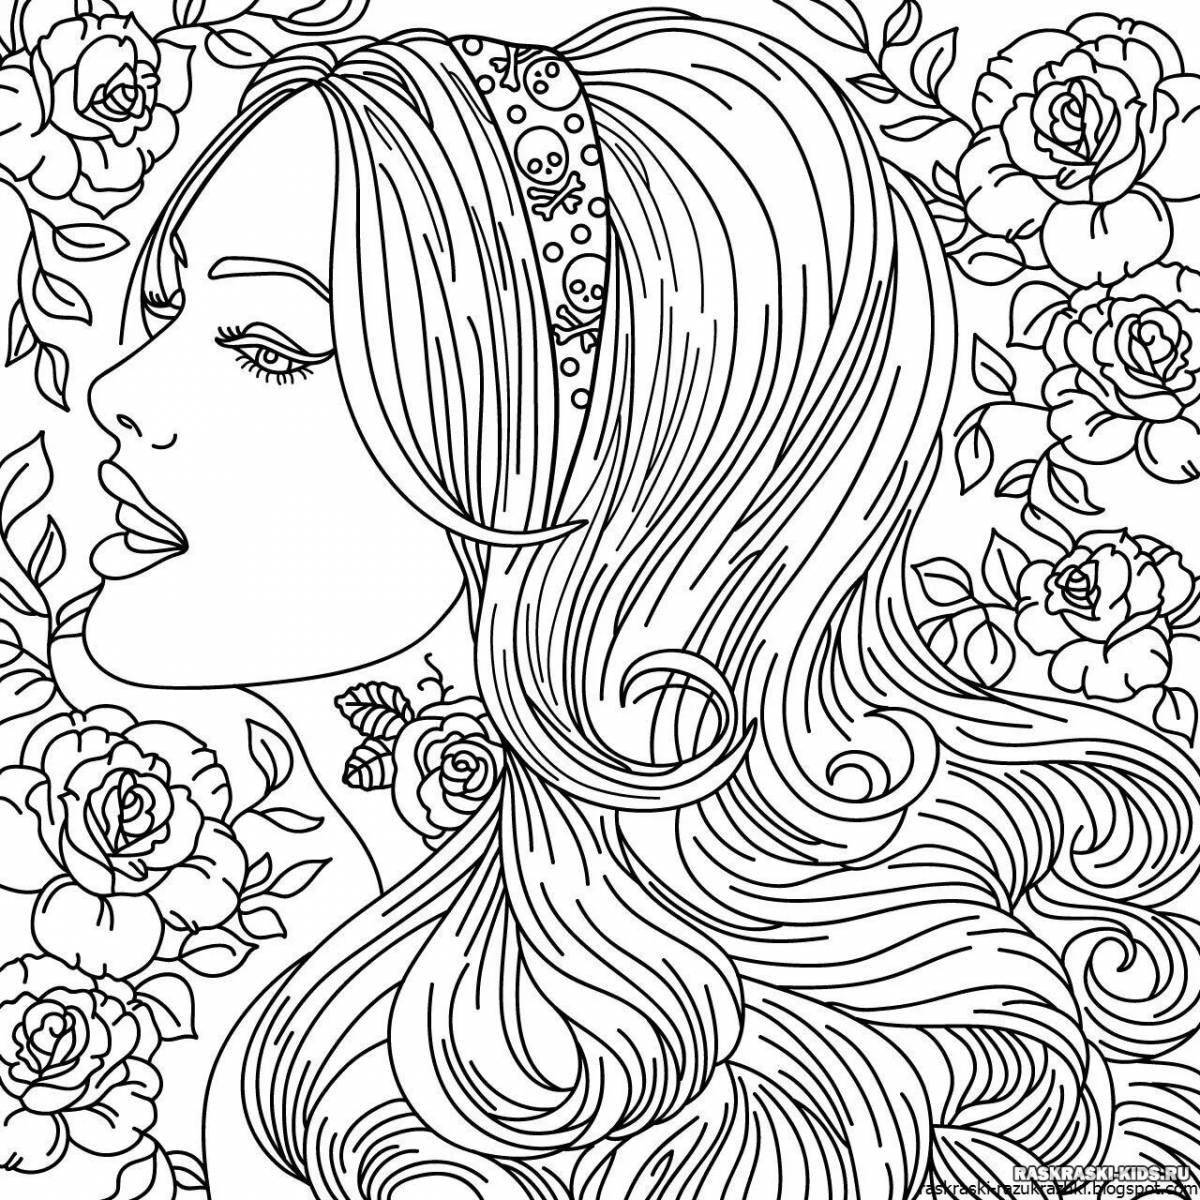 Amazing coloring book for girls 14 years old